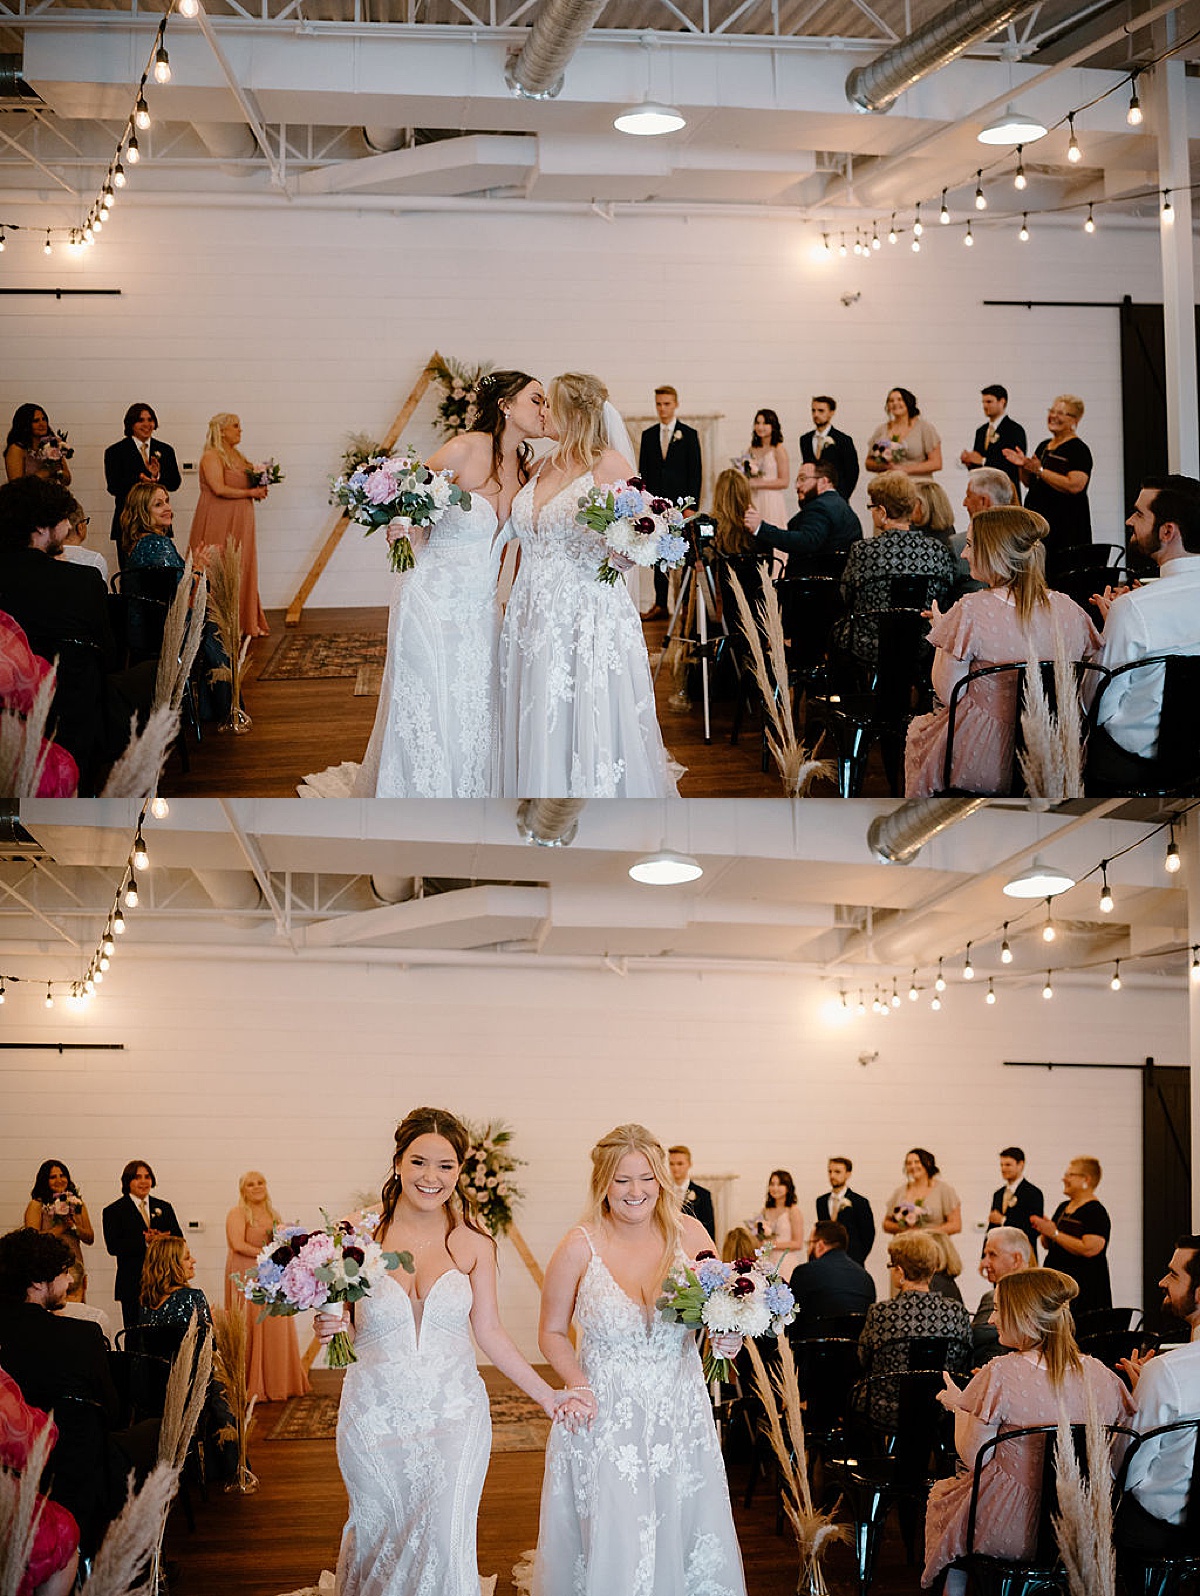 Two brides walk down the aisle after getting married during ceremony shot by Indigo Lace Collective